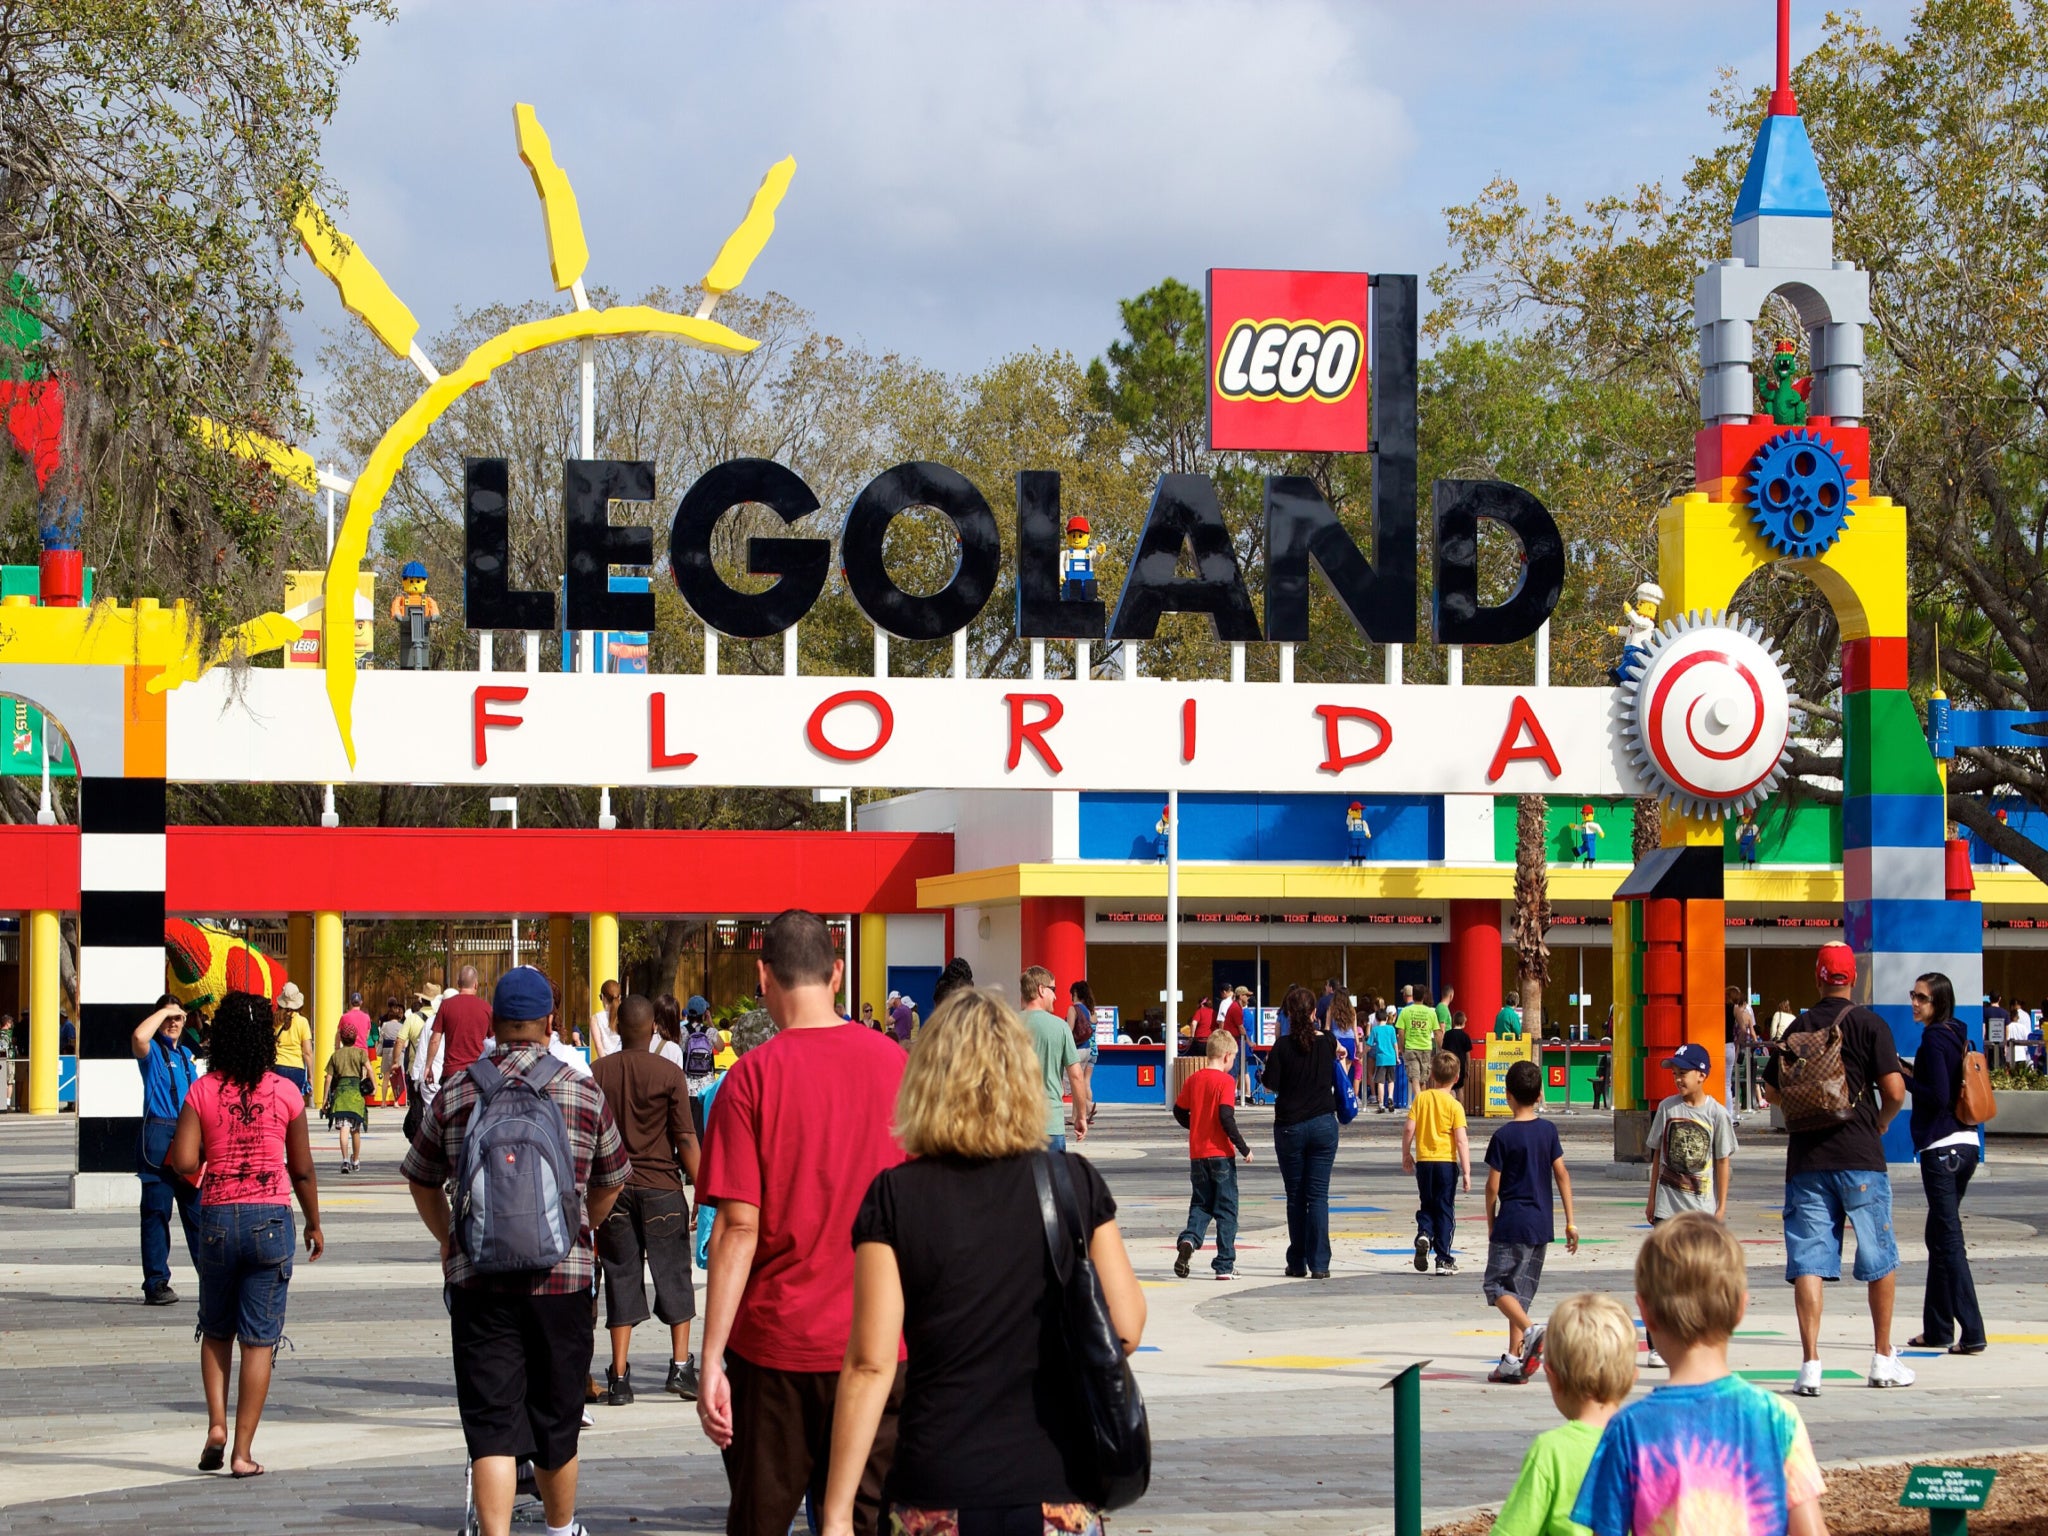 Legoland Florida has two theme parks, a water park, and three themed hotels